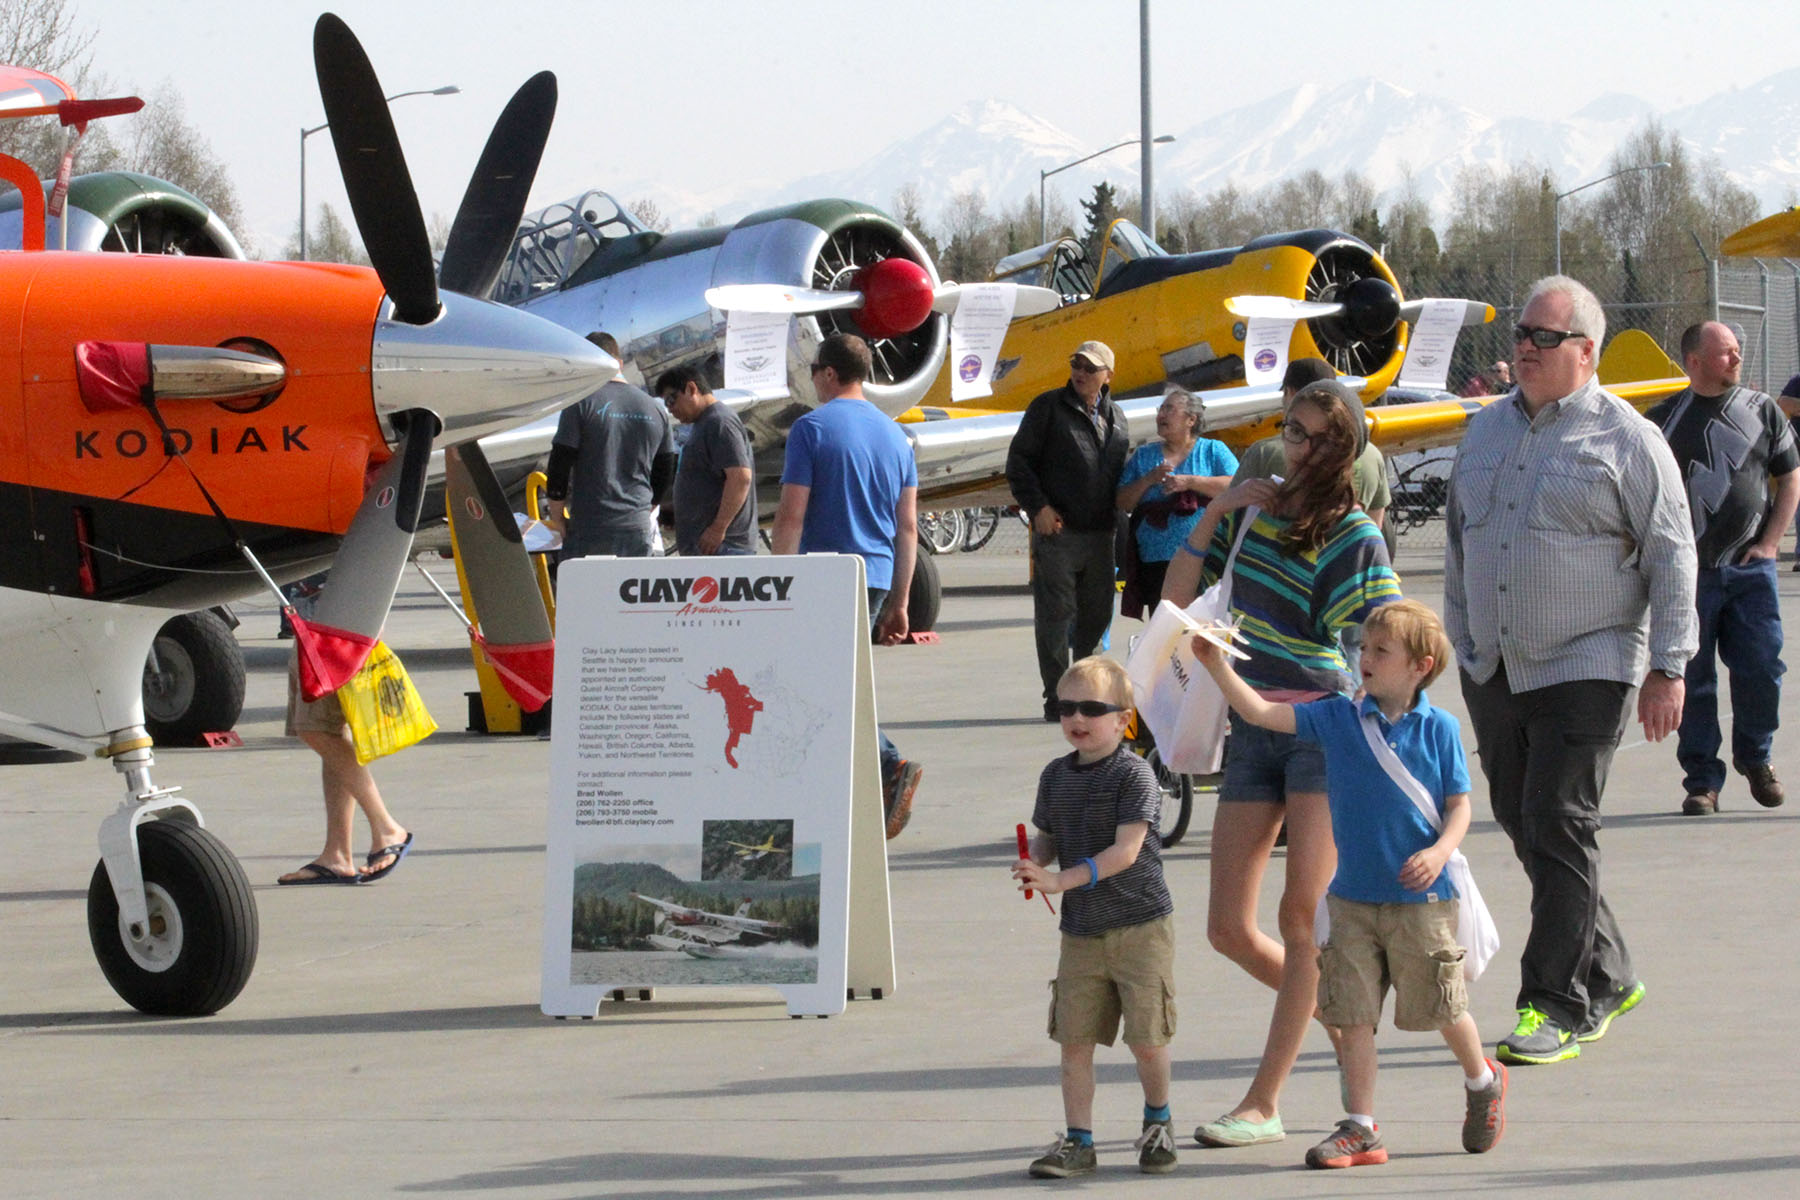 Free to all aviators and their family this show attracts over 20,000 people yearly.